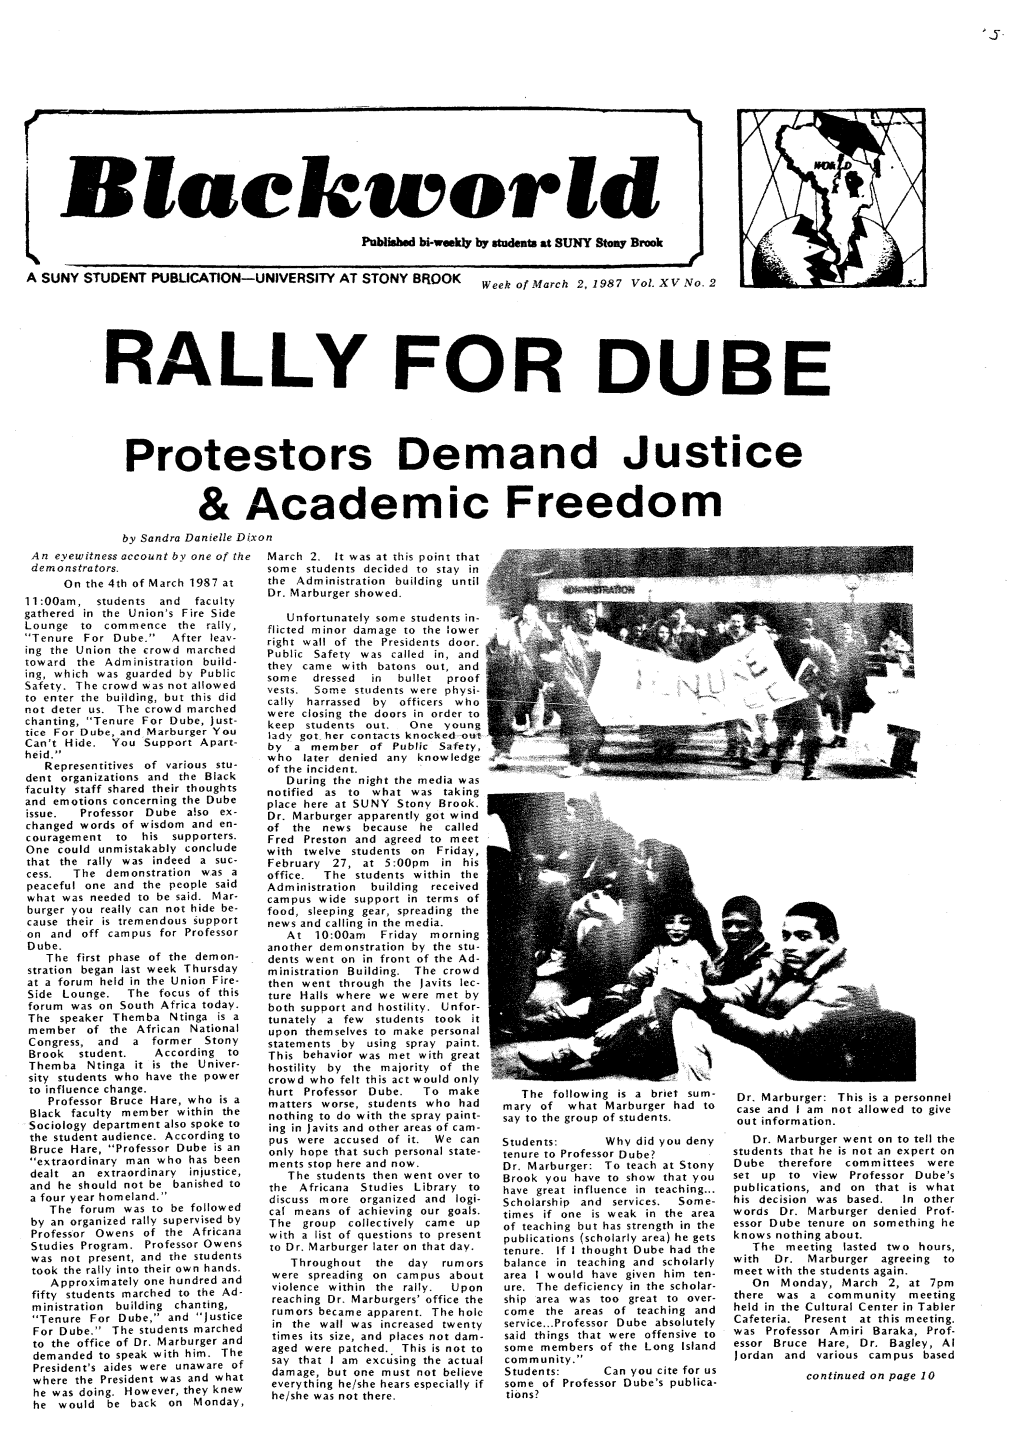 RALLY for DUBE Protestors Demand Justice & Academic Freedom by Sandra Danielle Dixon an Eyewitness Account by One of the March 2